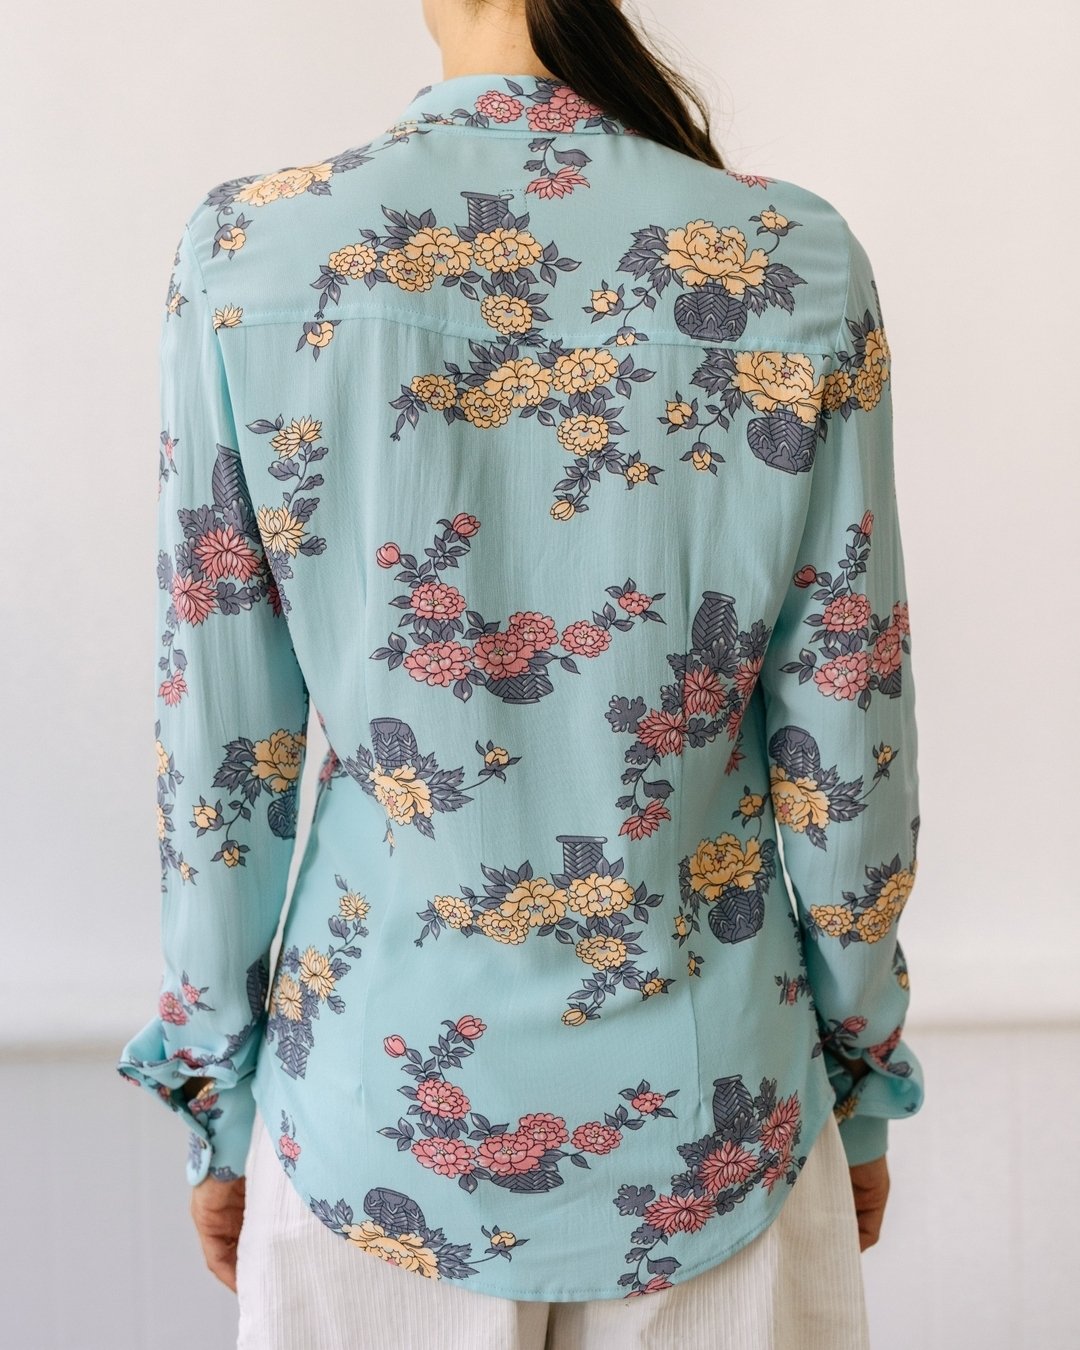 Included in this blouse are elegant silhouette hourglass shaping at the waist and a no-gape CurveShape placket (our unique solution to prevent gapes in stretchy fabrics!). Beautifully draped and figure-gracing. Thoughtfully hand-crafted. 

#sustainab